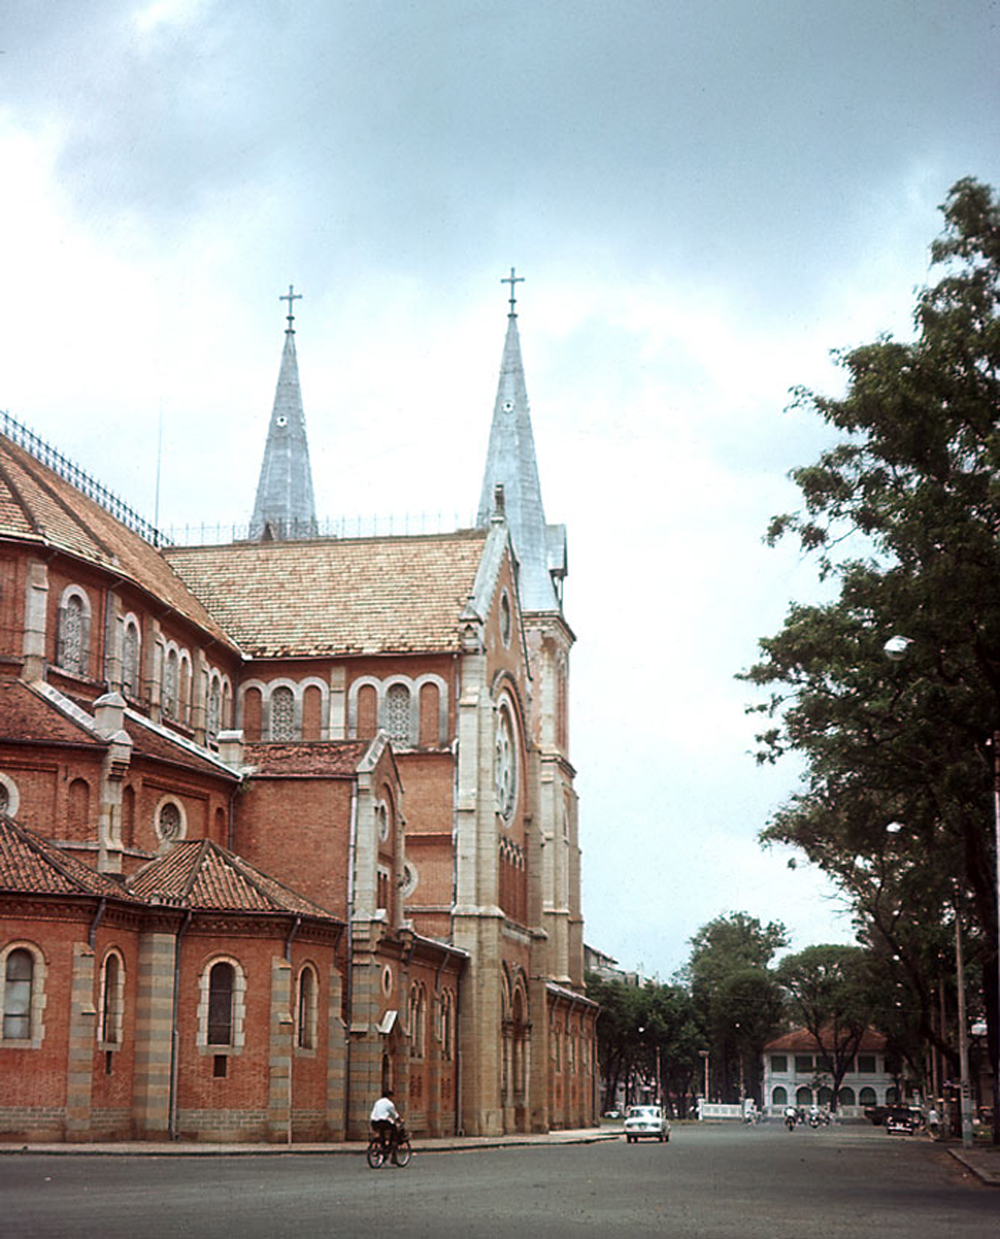 an old brick church with large towers on both sides